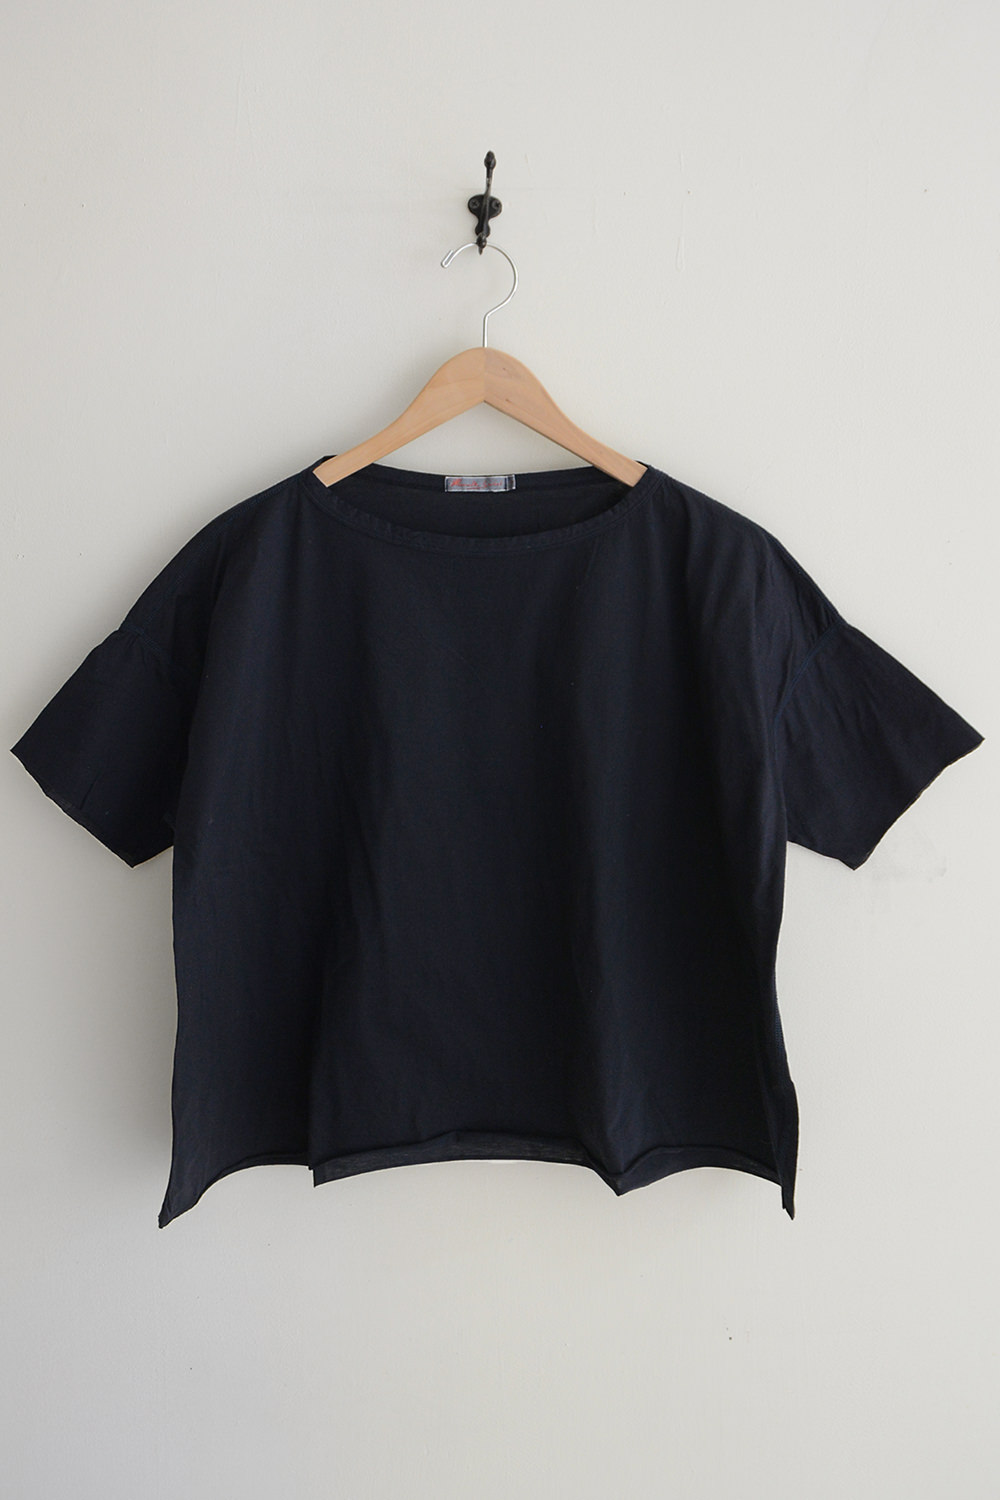 Manuelle Guibal Oversized Tee Night Top Picture